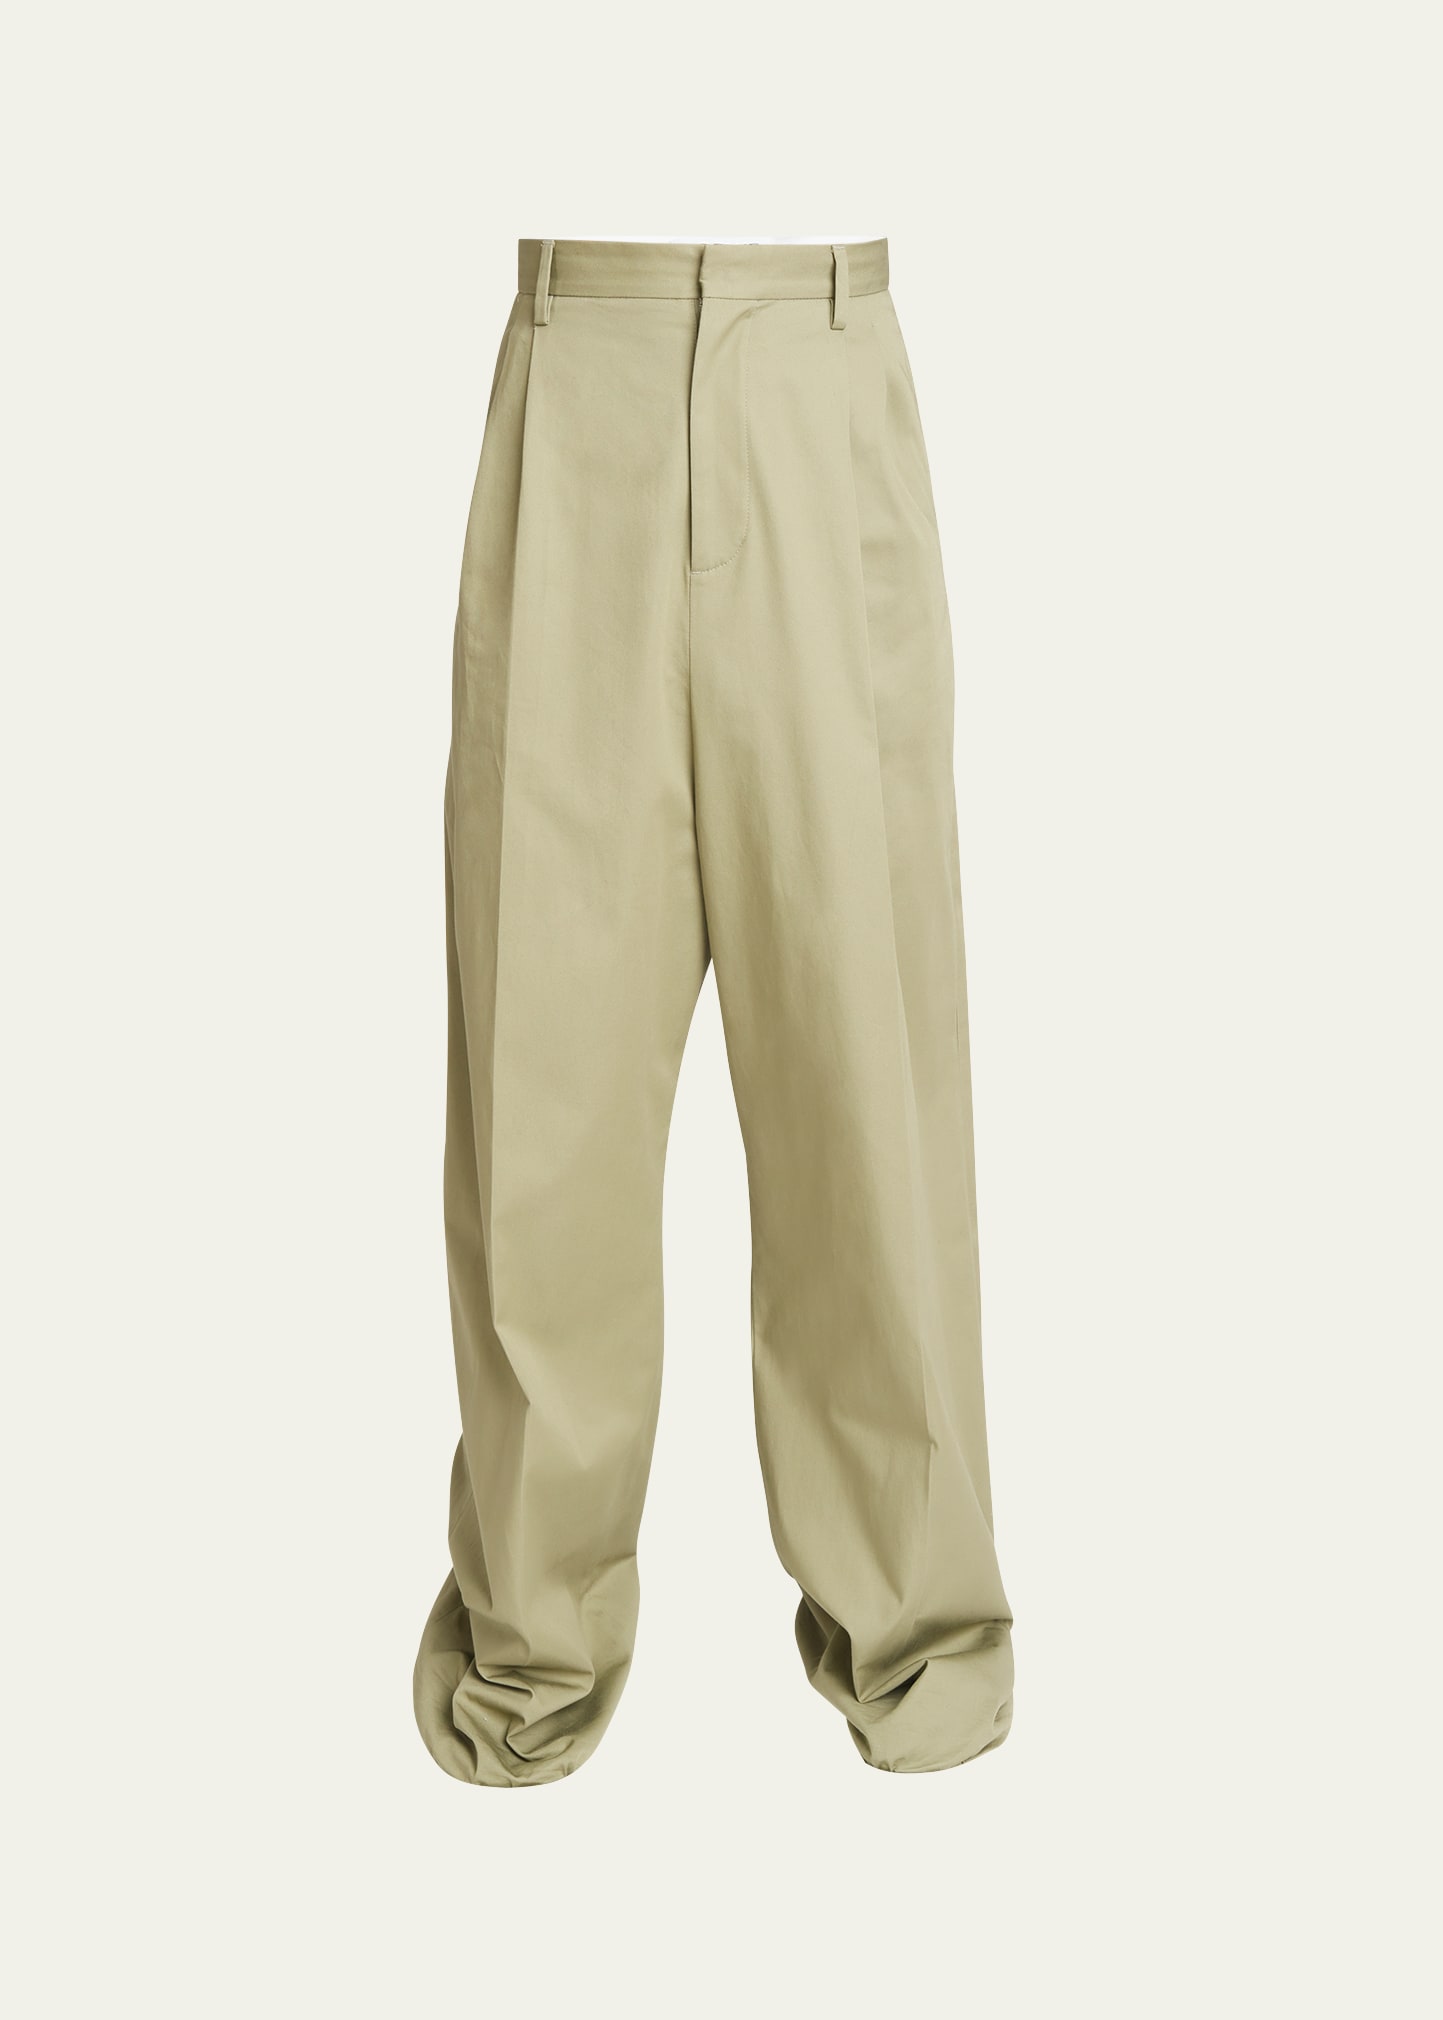 Loewe Men's Pleated Loose Cotton-blend Trousers In Military G